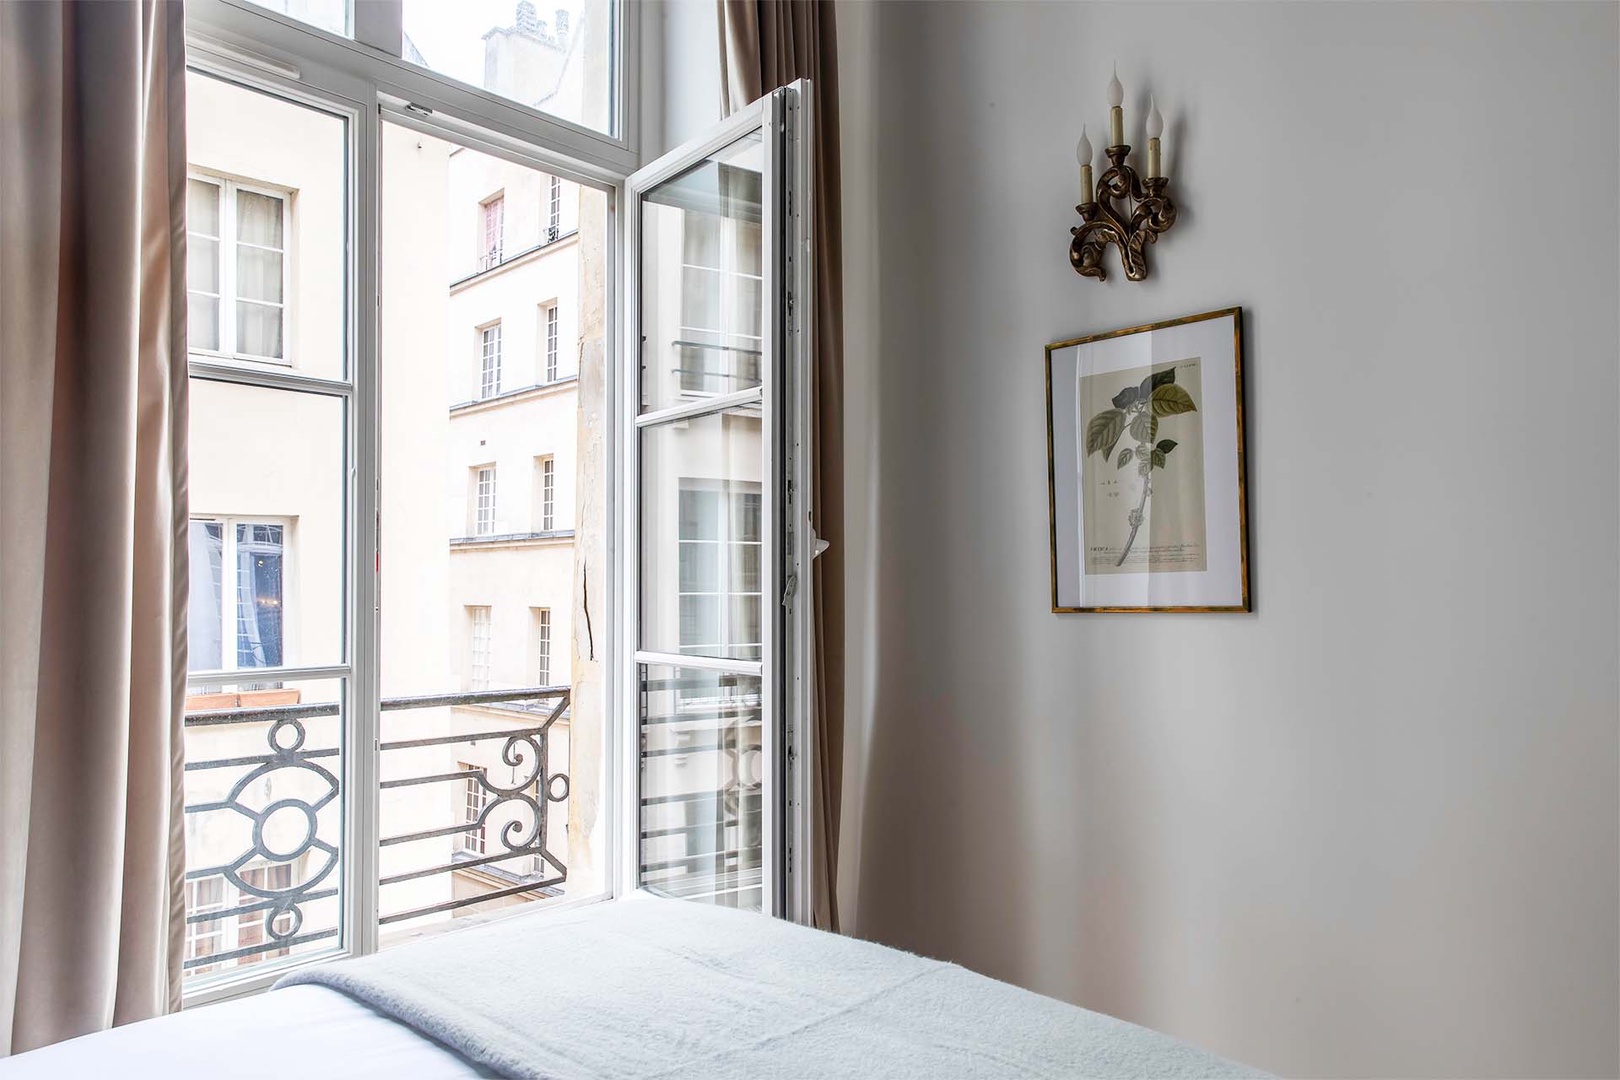 Wake up and enjoy staying on a historic island in Paris!